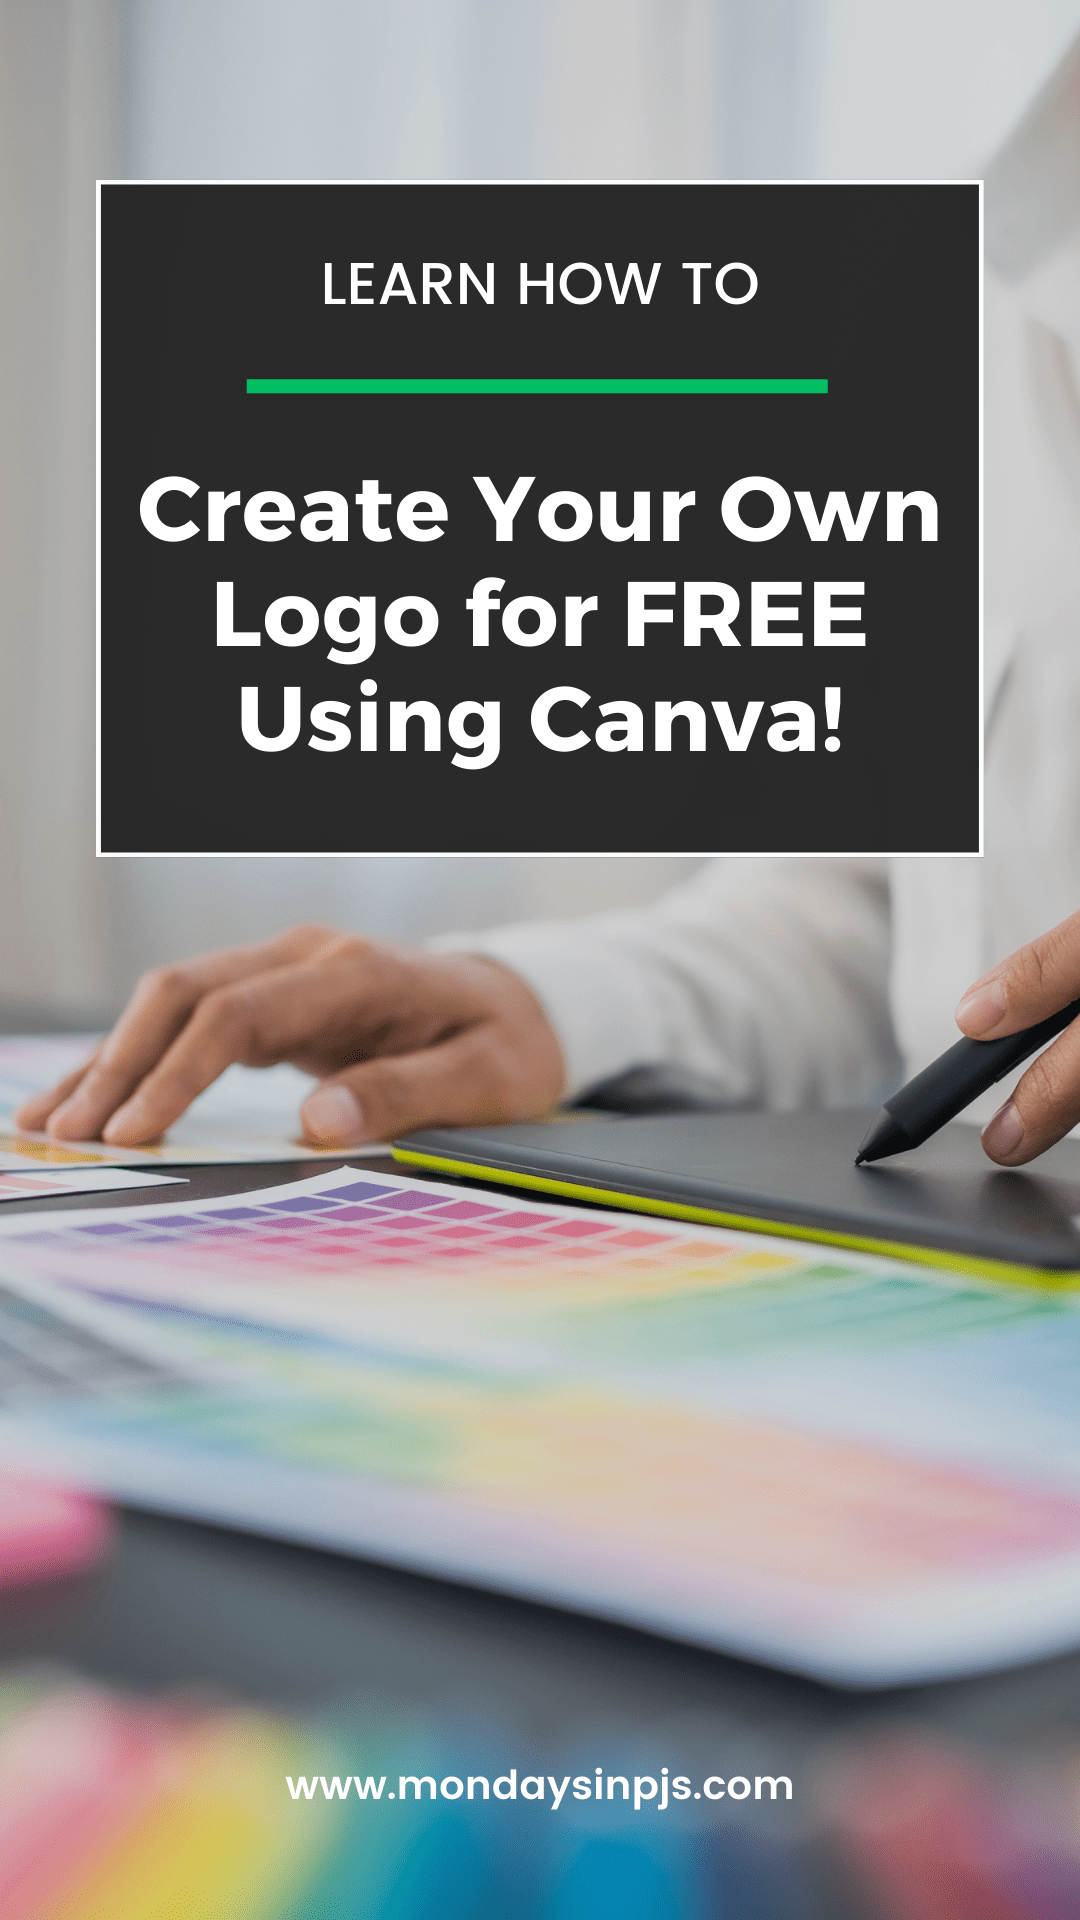 How to Create Your Own Logo for Free Online - Mondays in PJs